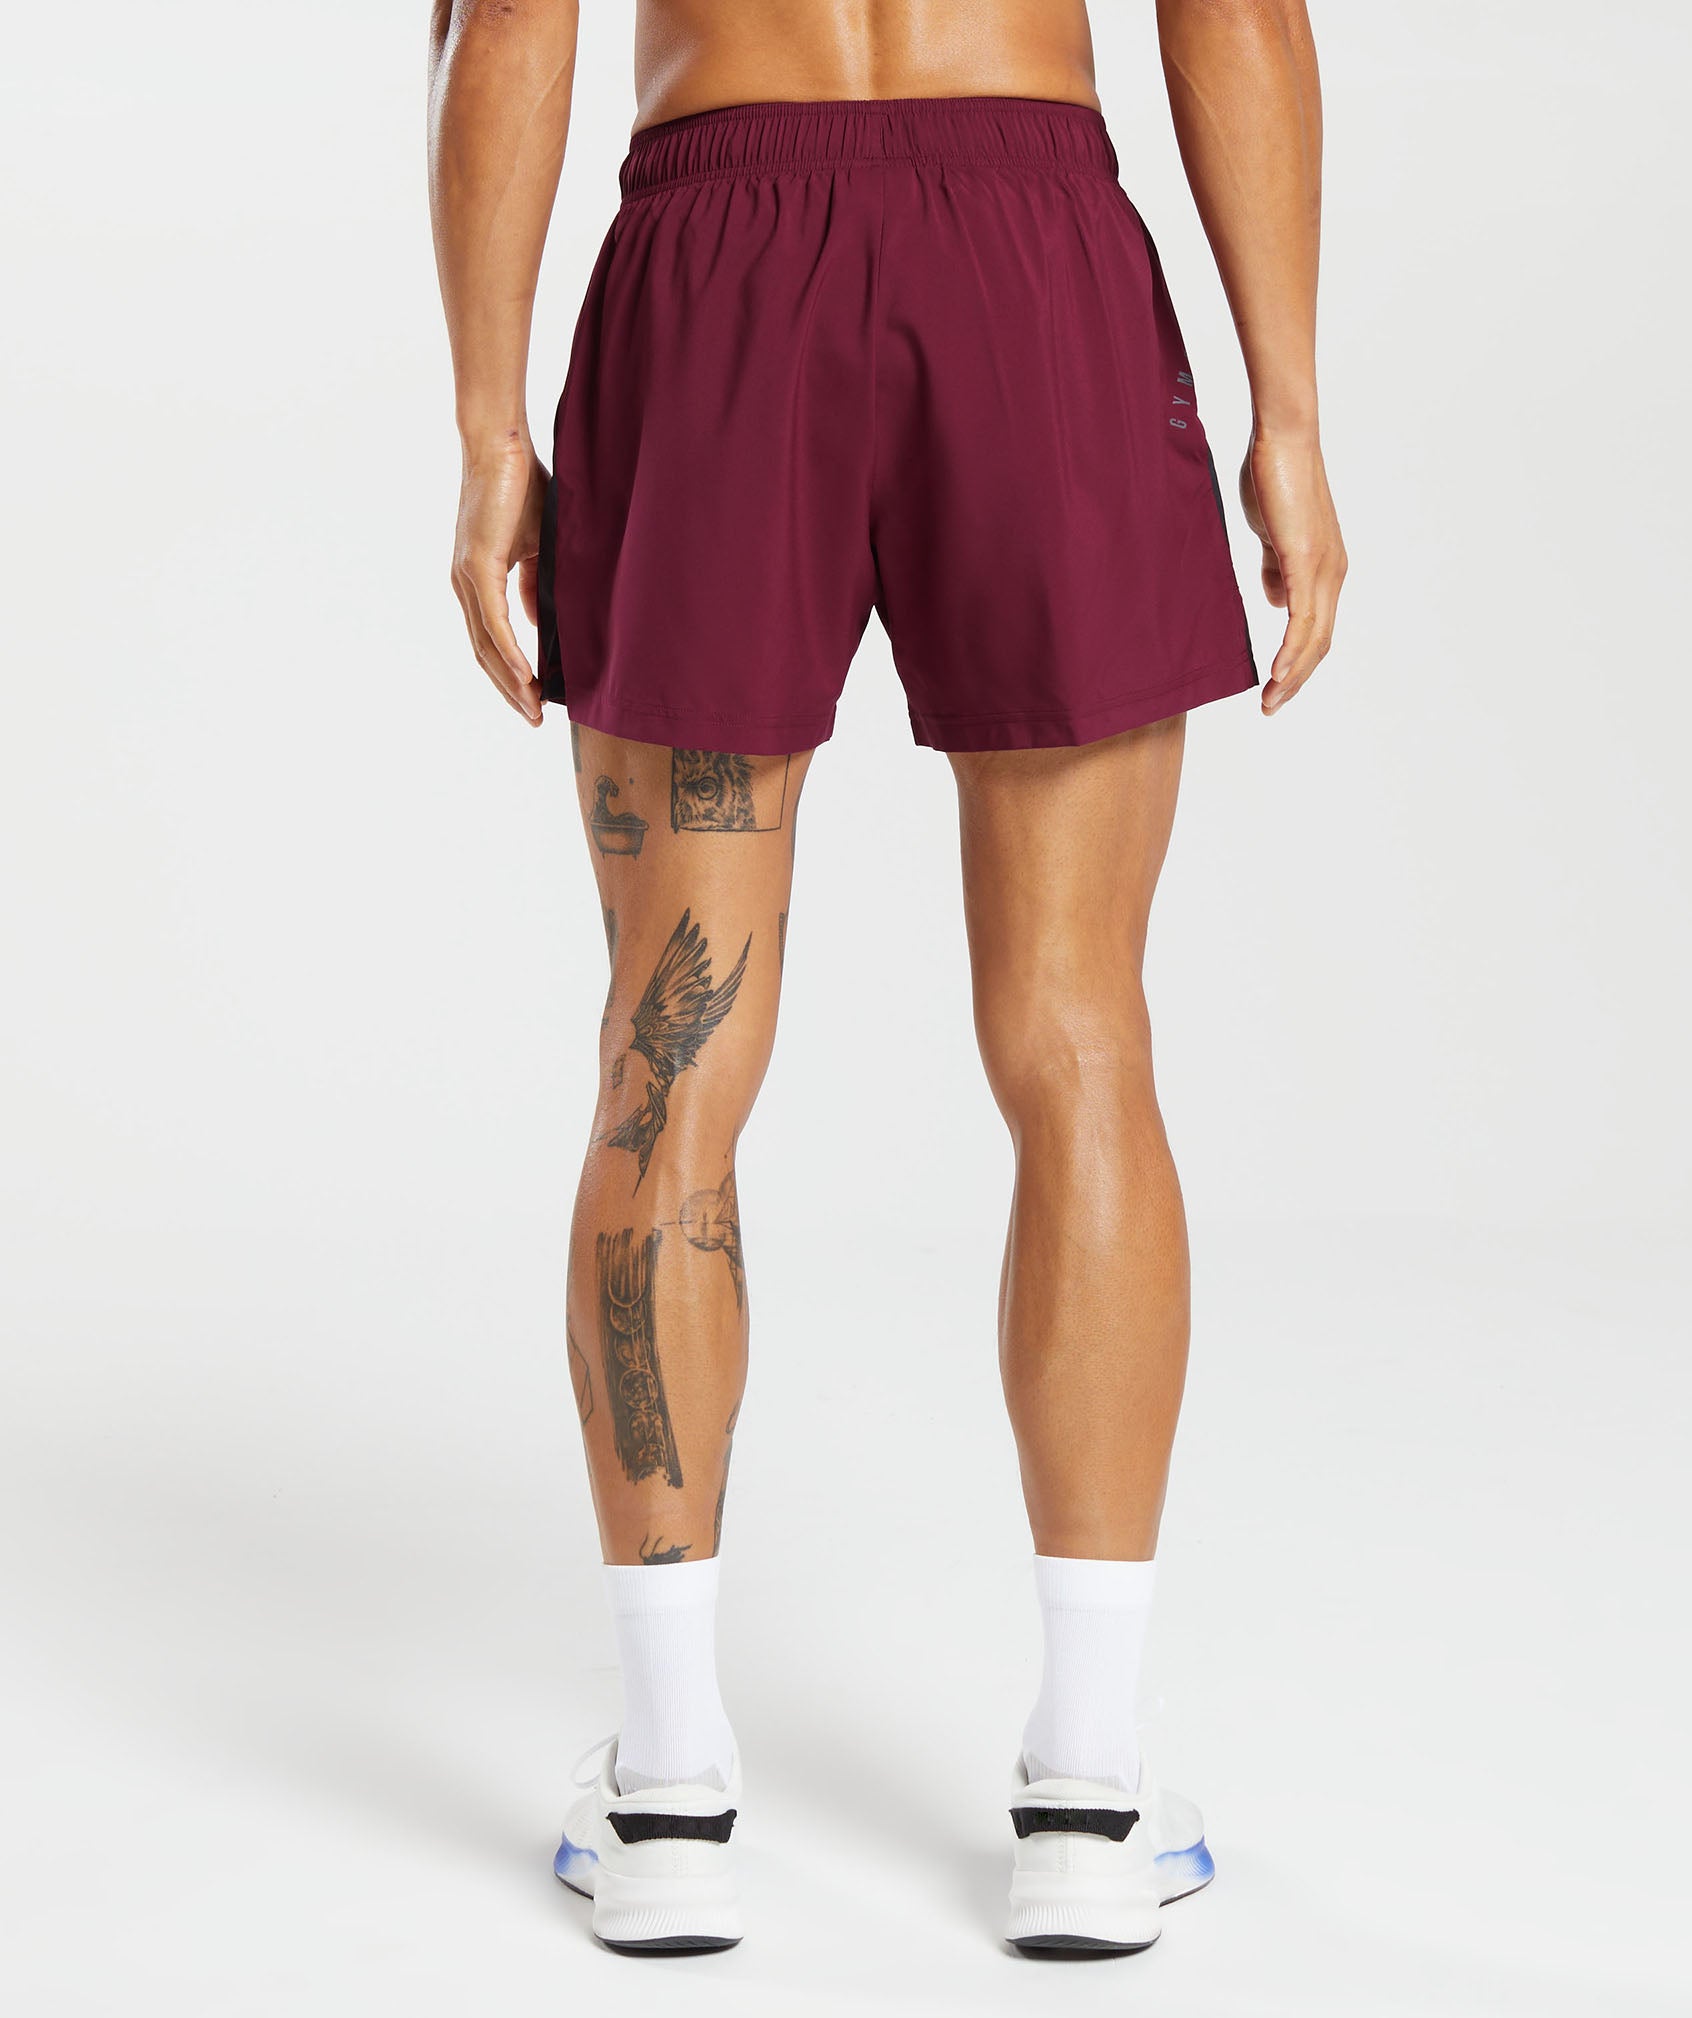 Sport 5" Shorts in Plum Pink/Black - view 2